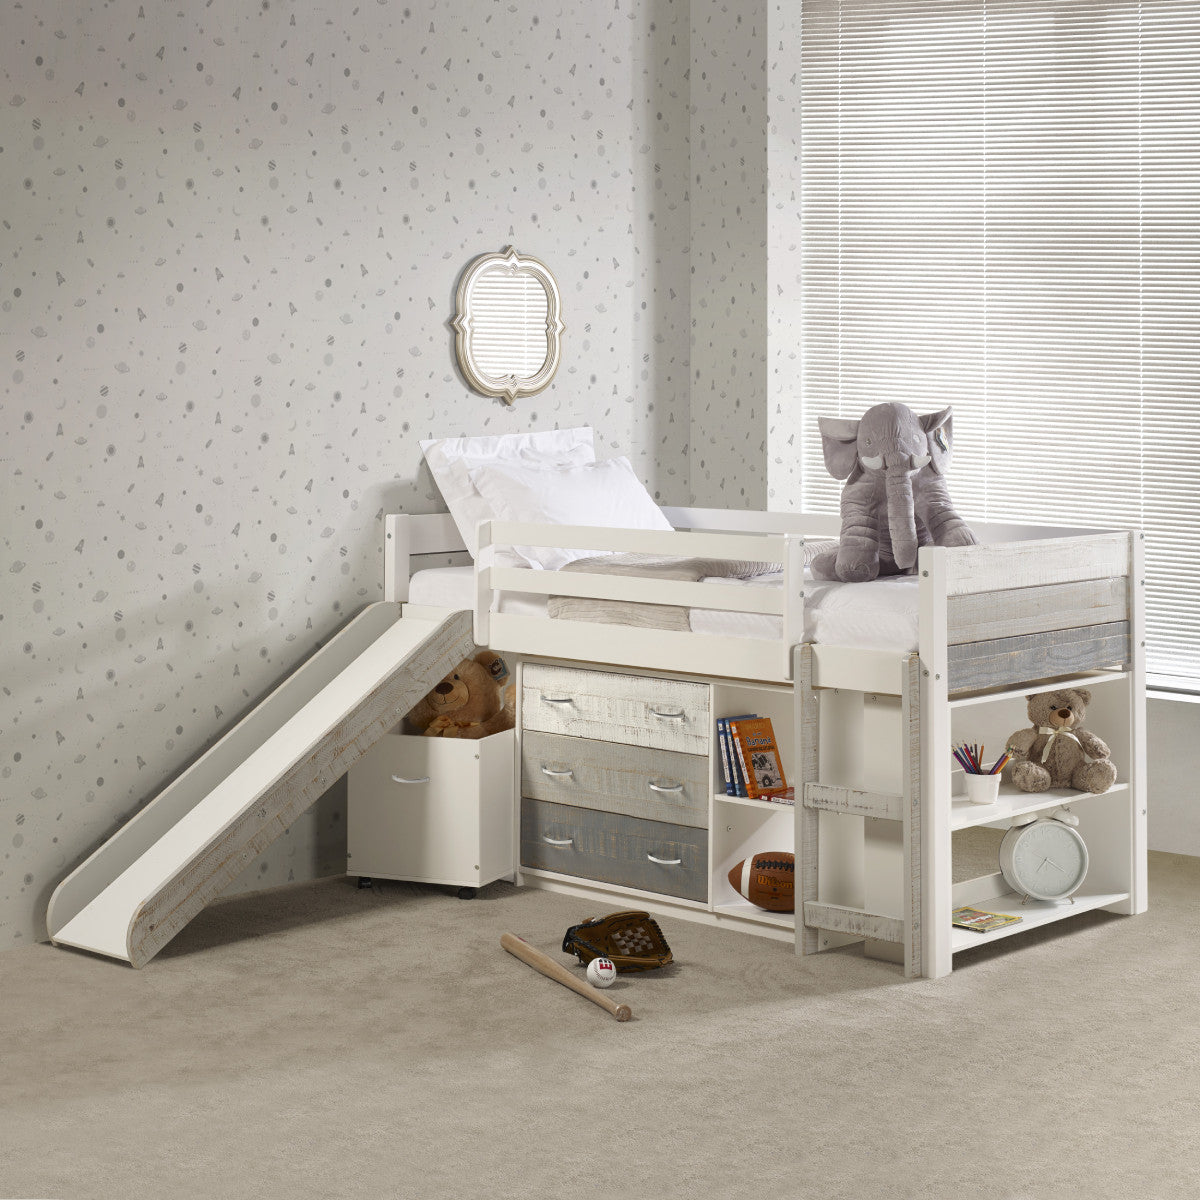 TWIN PANEL LOW LOFT SET WITH SLIDE & CASE PIECES IN TWO-TONE GREY/WHITE FINISH